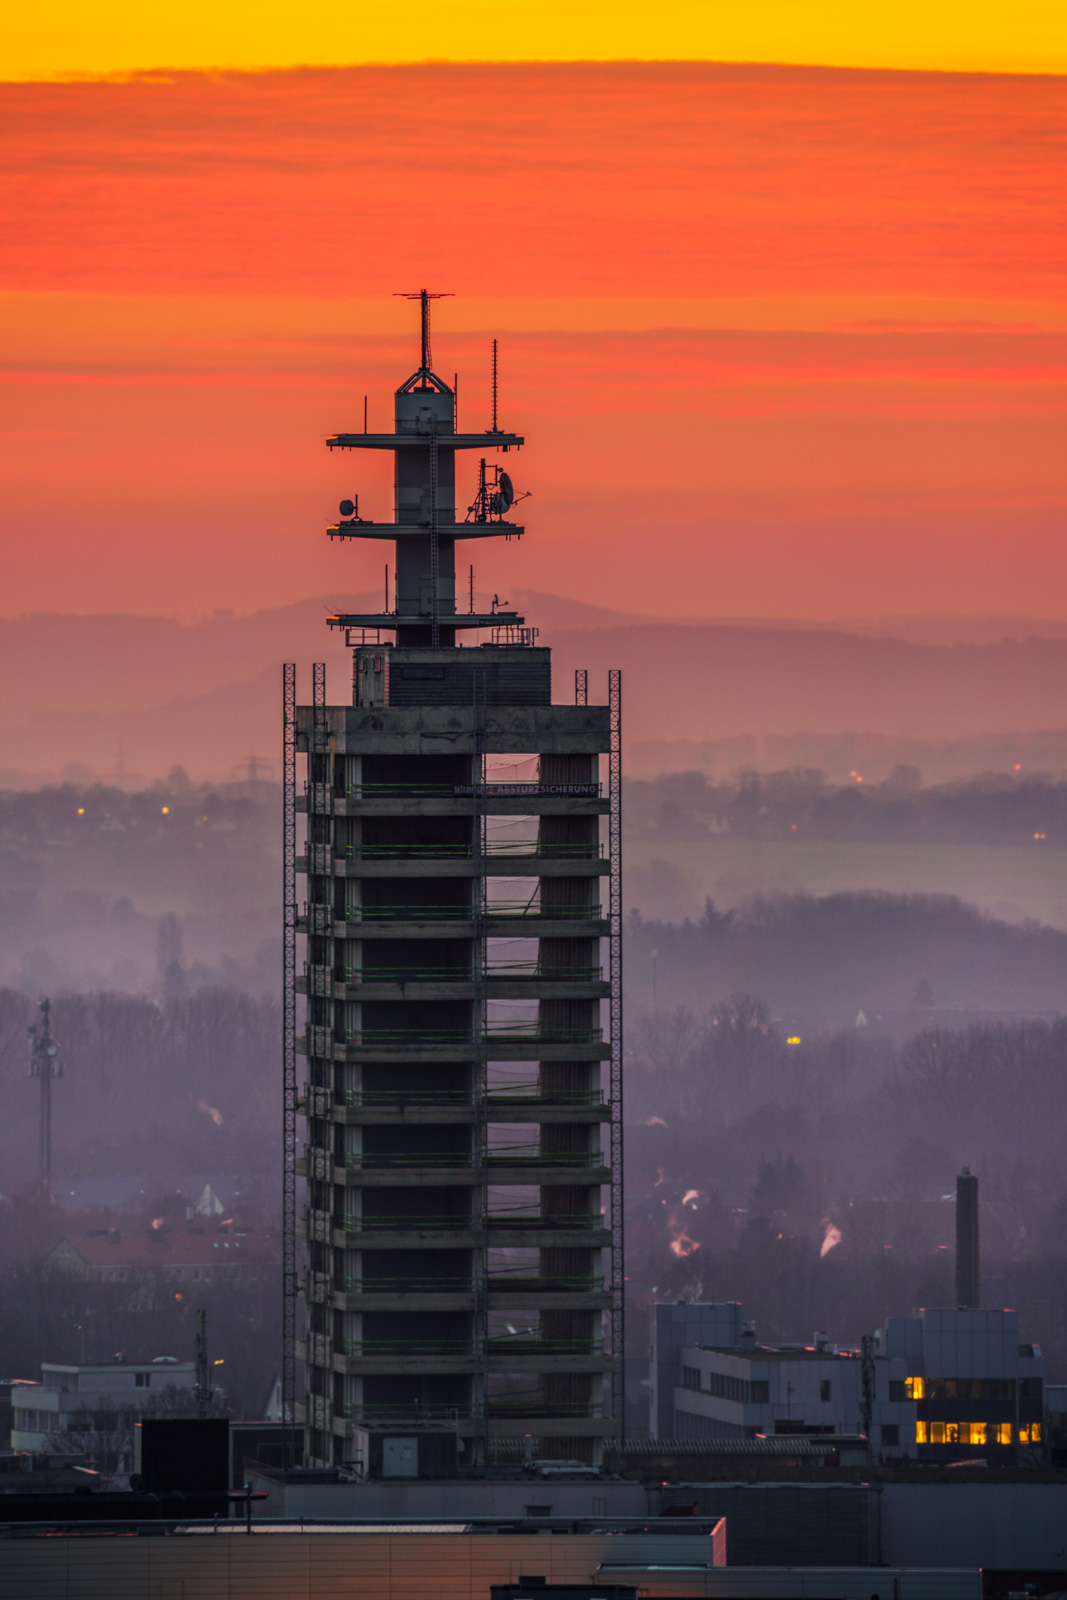 High-rise under construction on 20 February 2021 (Bielefeld, Germany).